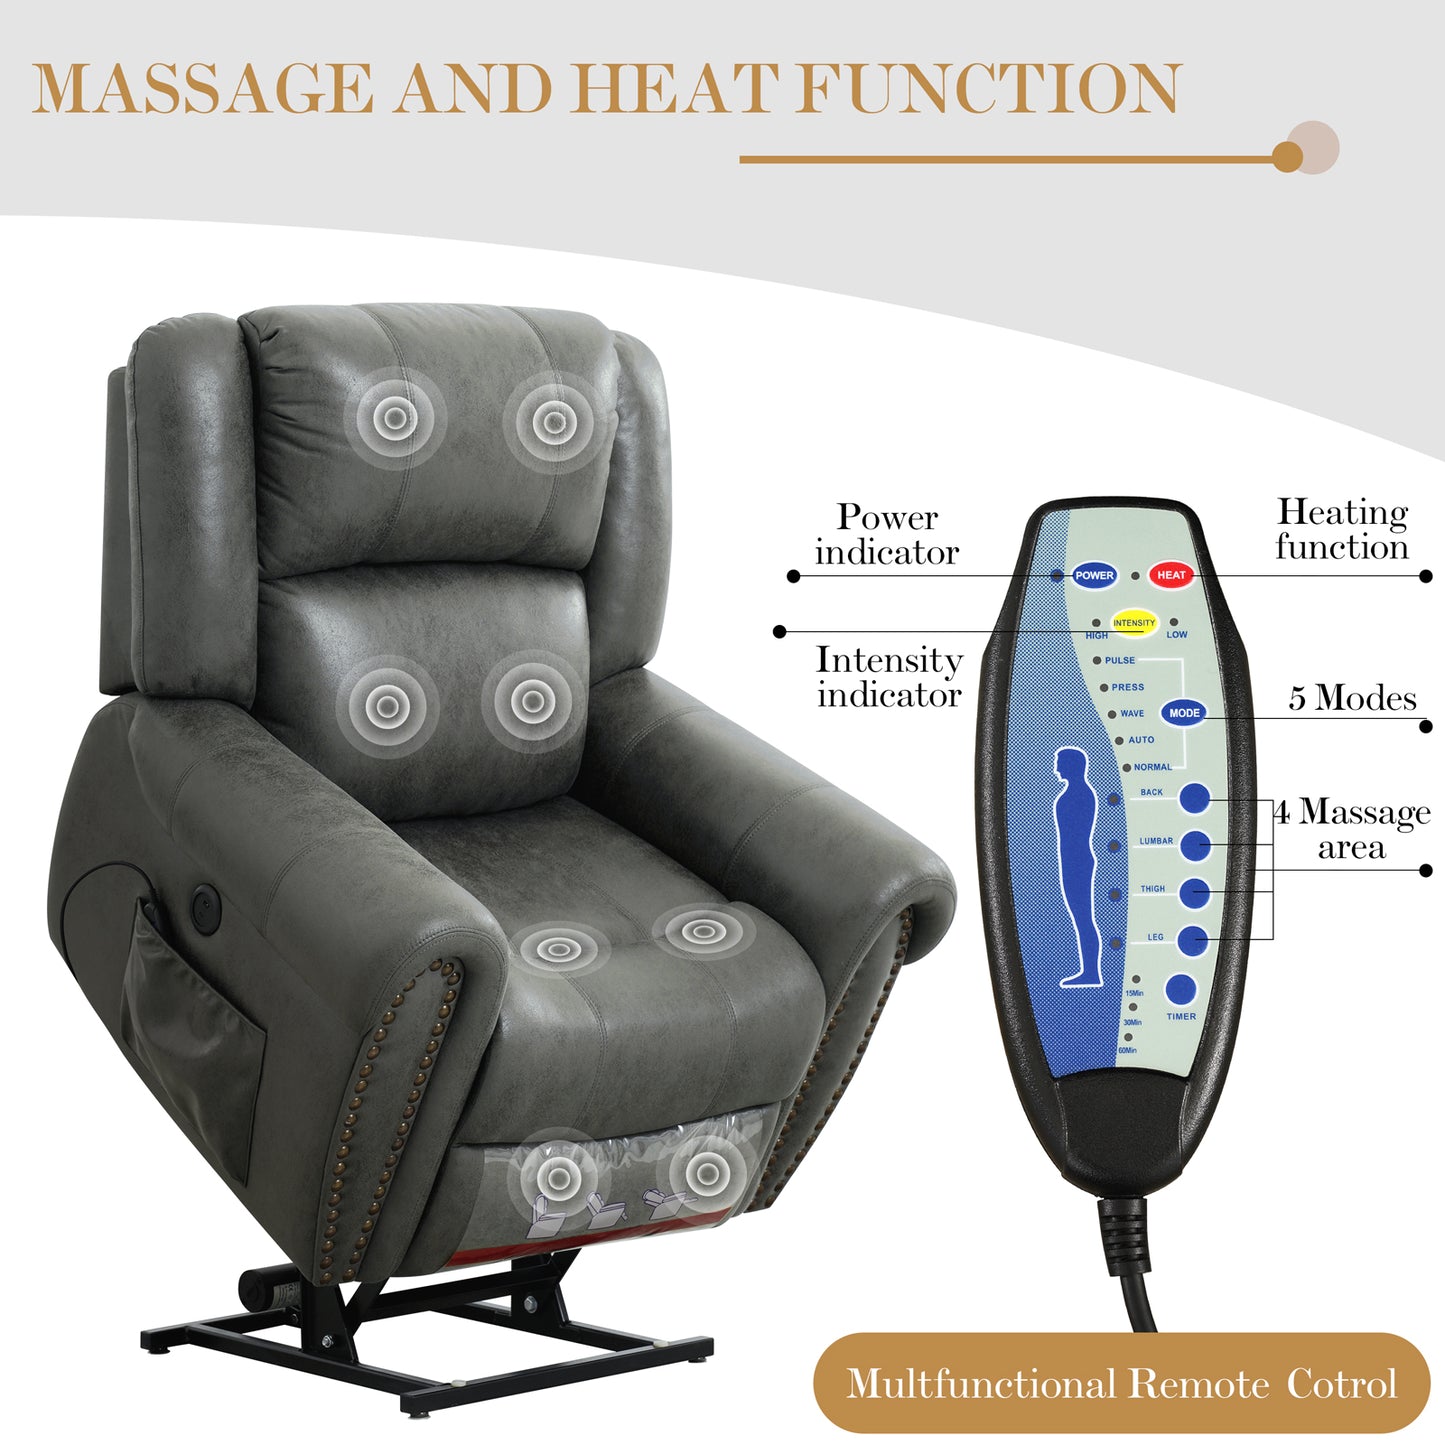 Luxury widened and thickened high-power lifting recliner with massage and heating, unlimited position, dual motor, genuine leather